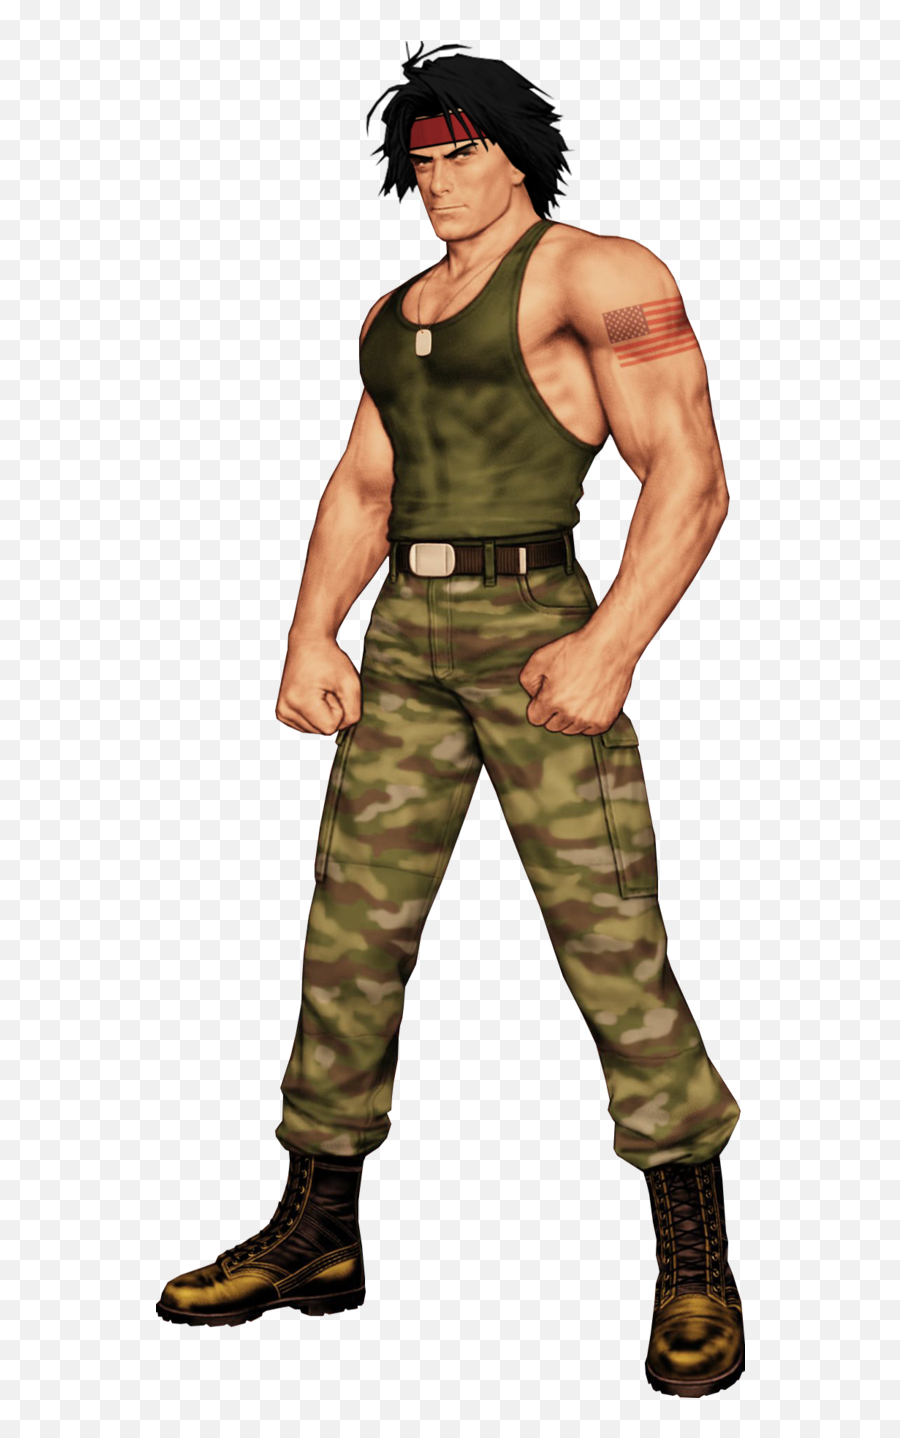 Rambo Transparent Png Image - Guile Street Fighter,Rambo Png